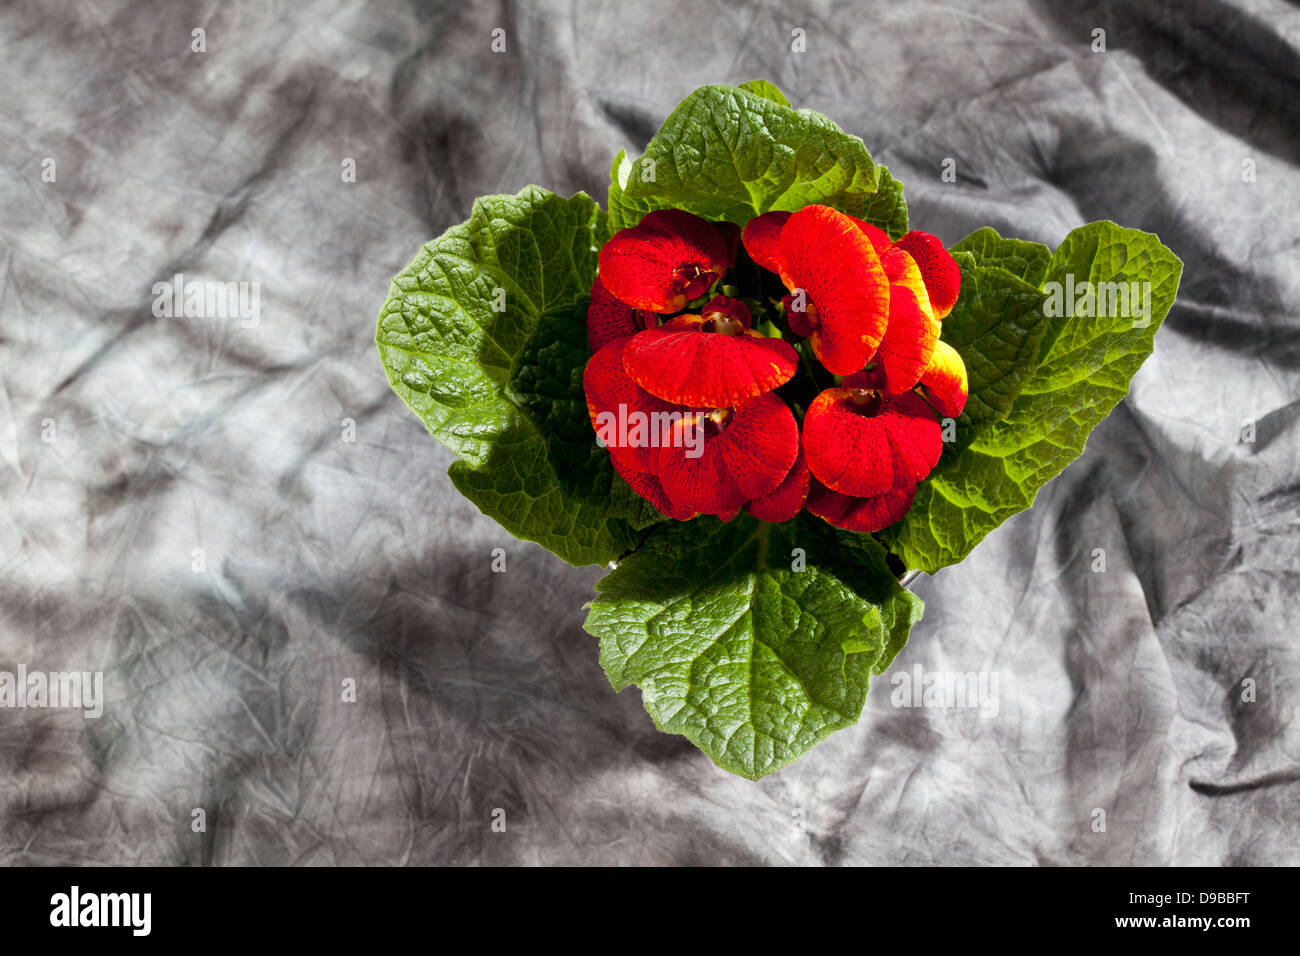 Red slipper flowers in pot on grey background, close up Stock Photo